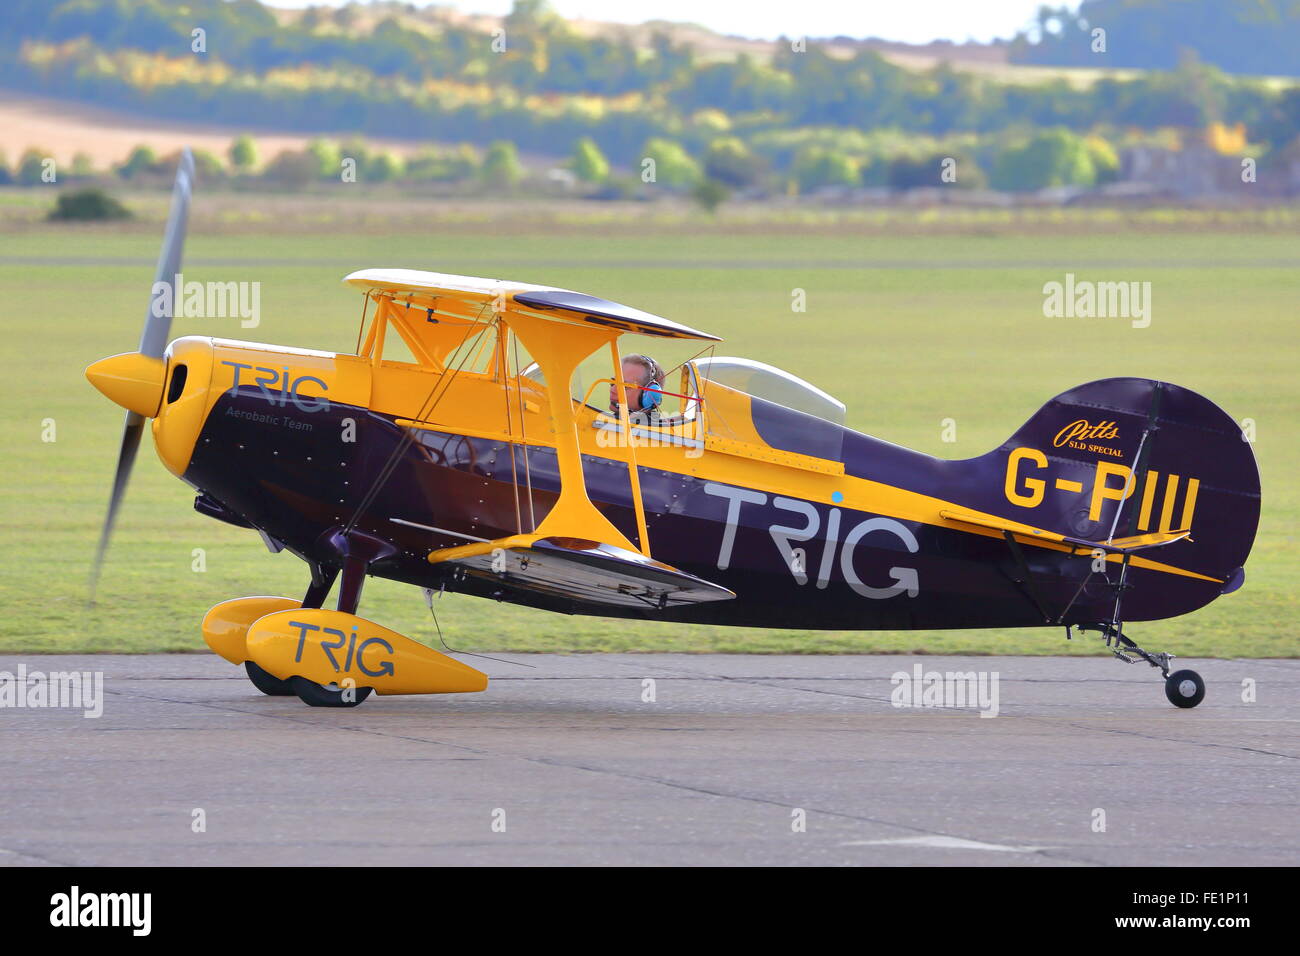 TRIG Pitts Special S-1D taxiing at Duxford Air Show, UK Stock Photo